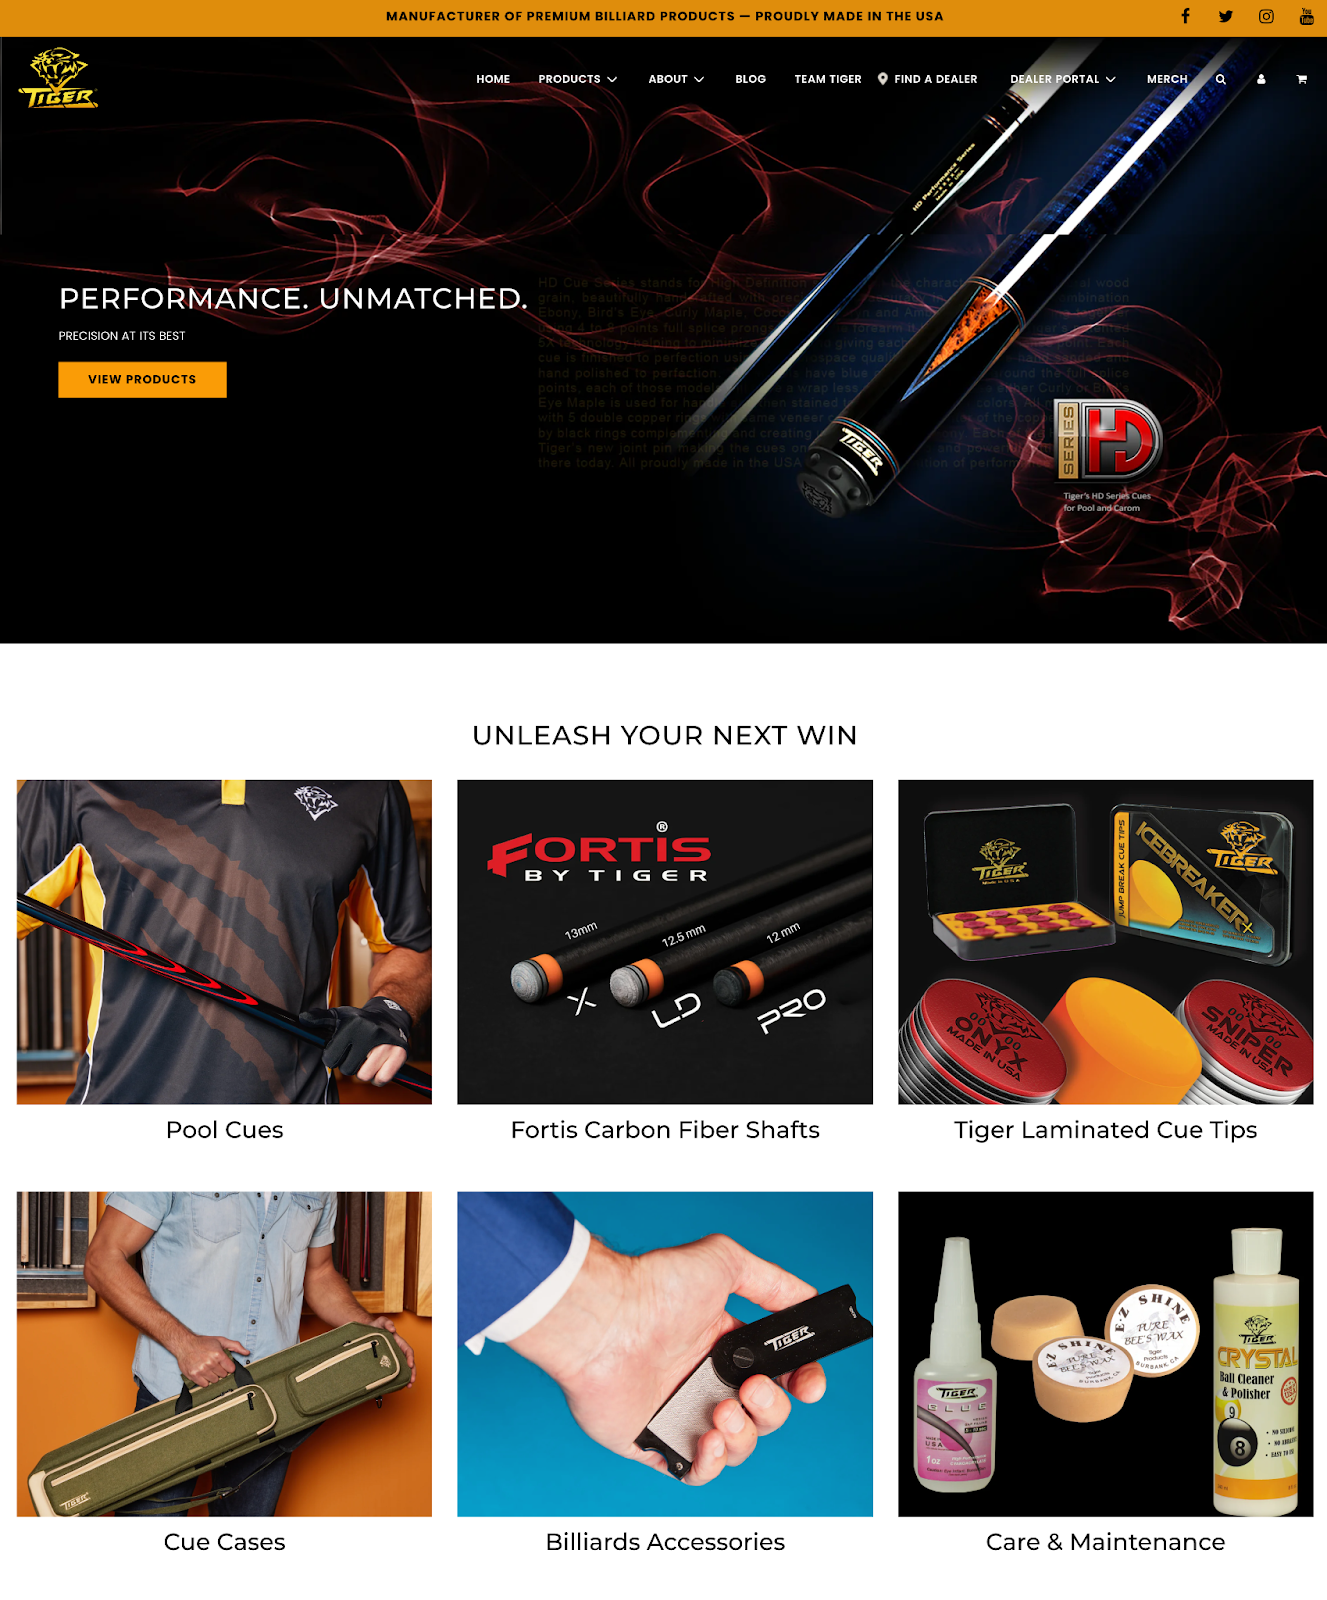 The Tiger Products homepage with a dark hero image and a grid of product categories below